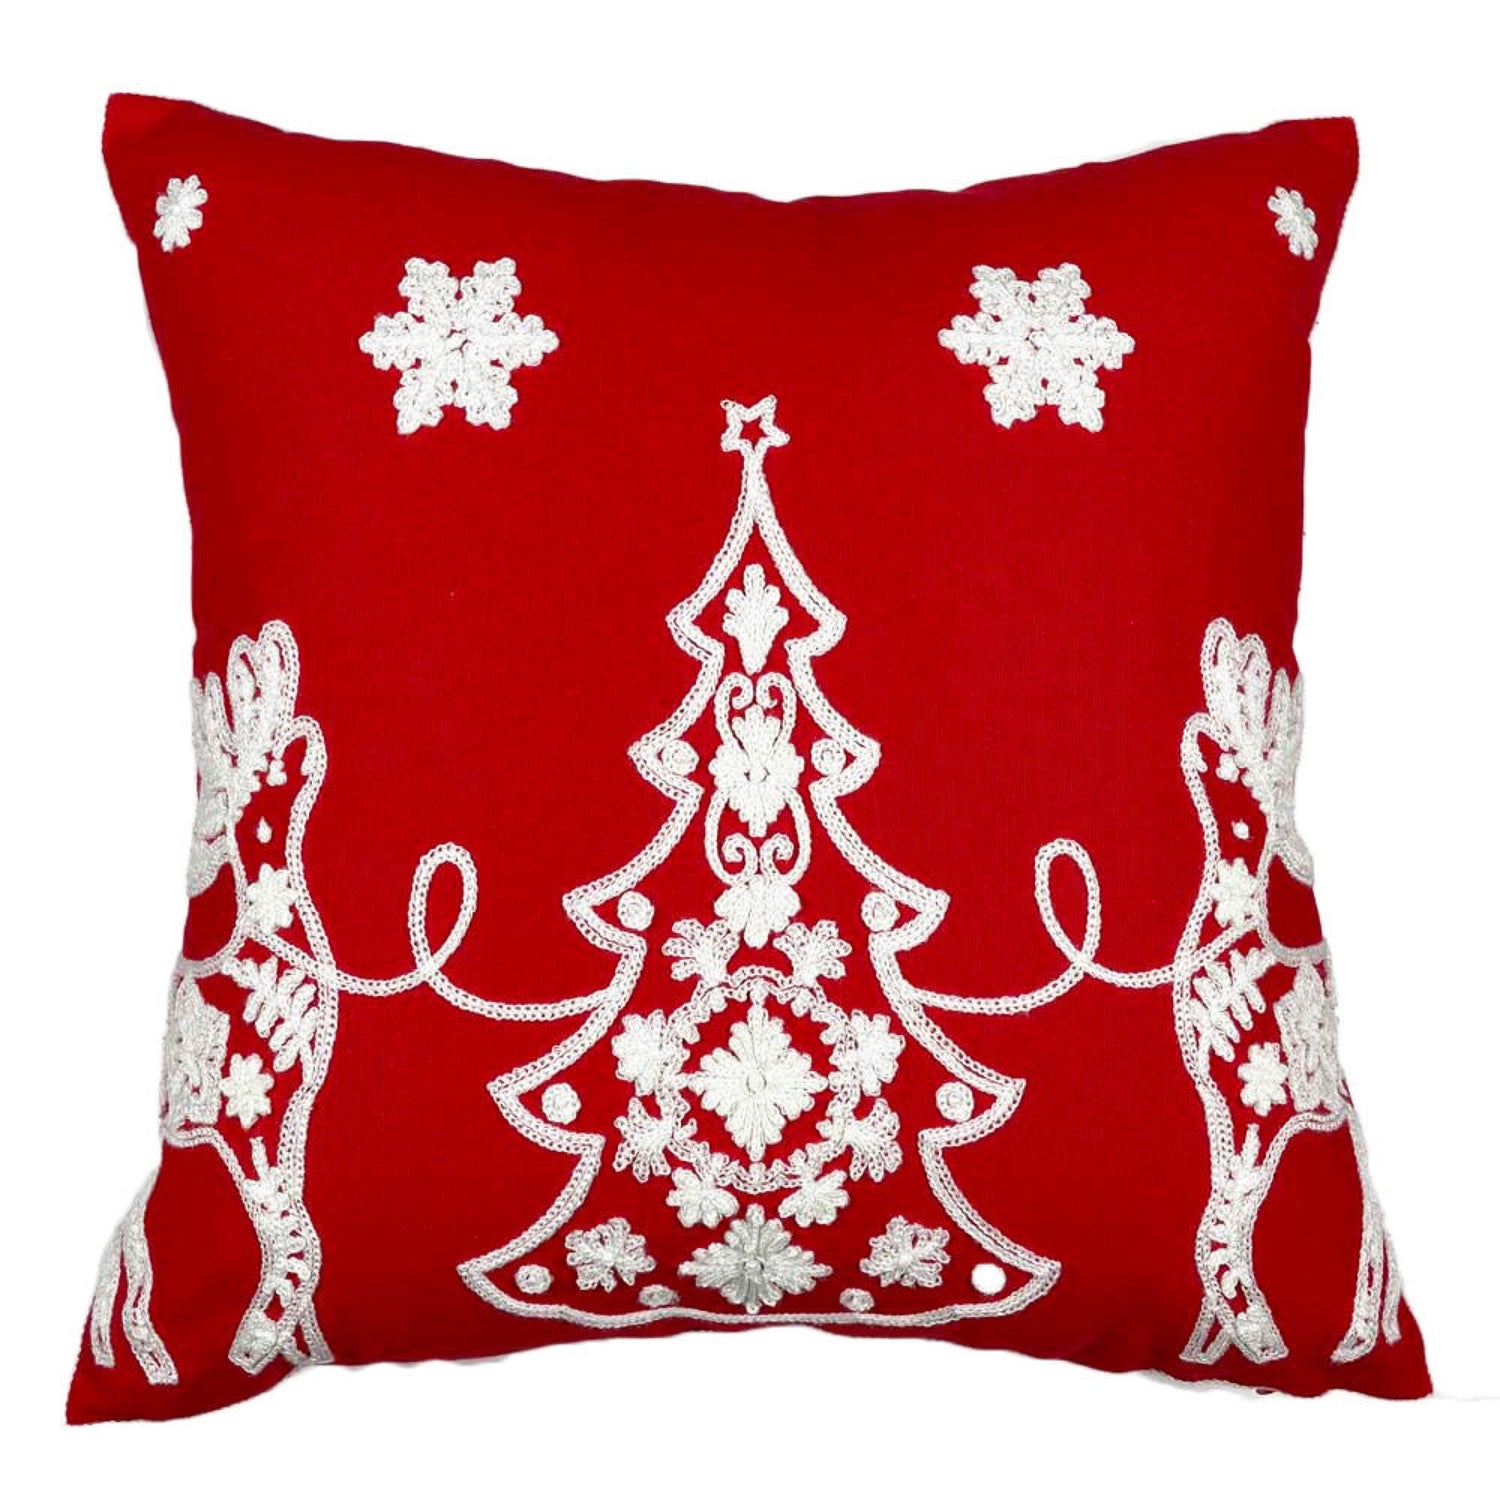 Christmas Tree Embroidered Pillow Cover